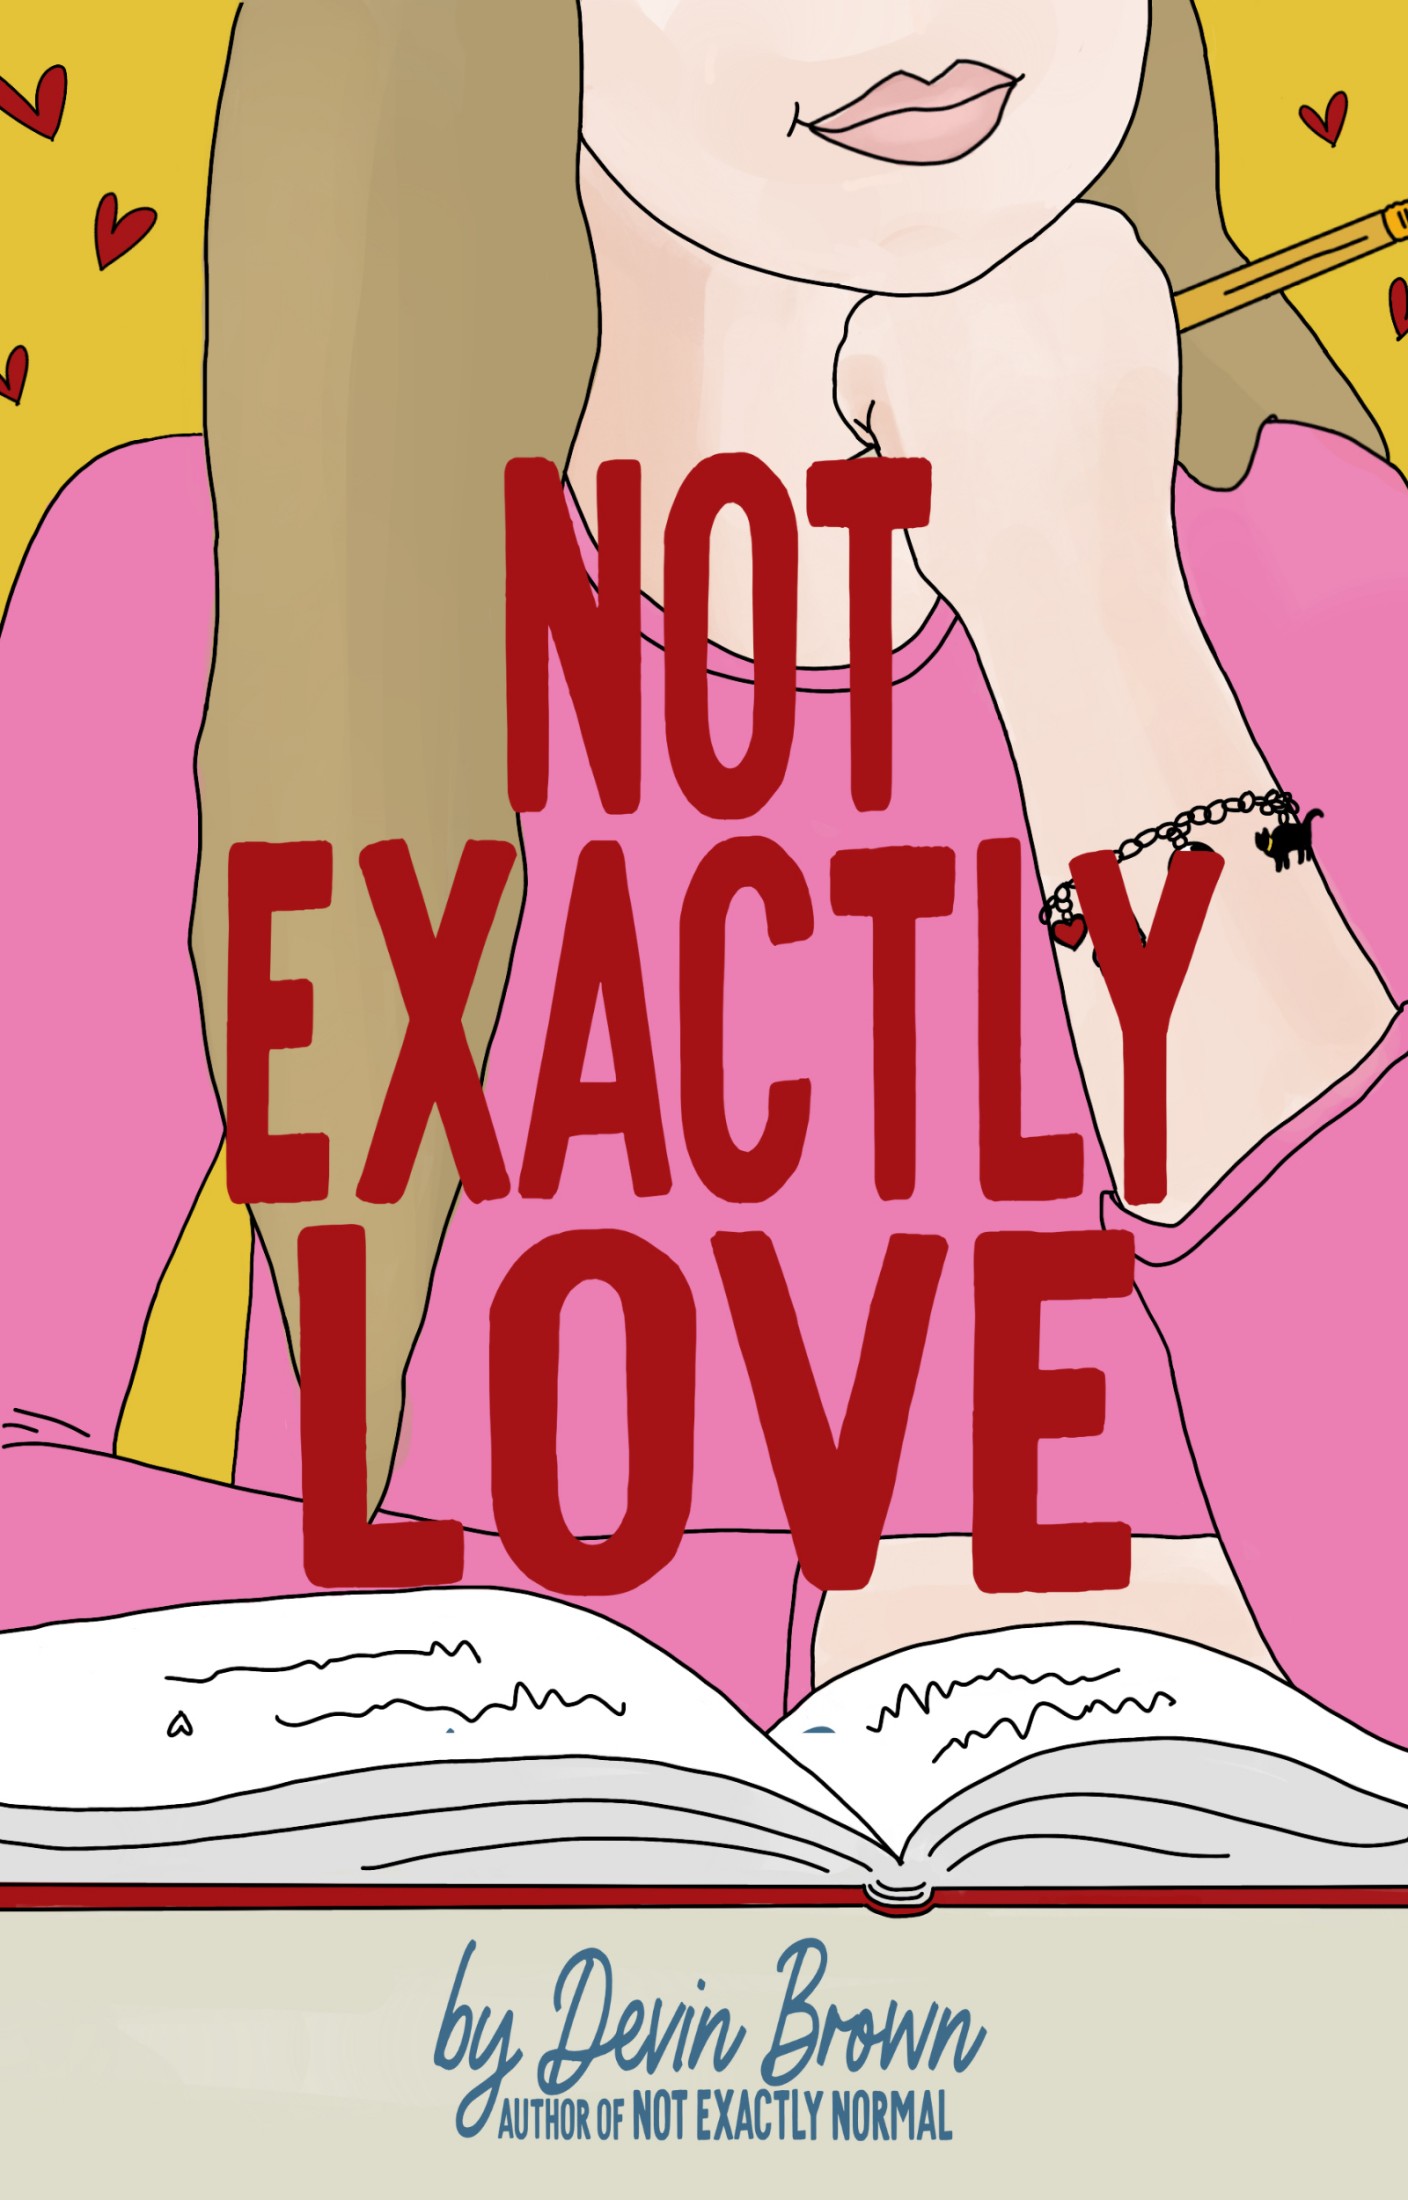 Not Exactly Love – A Book Review